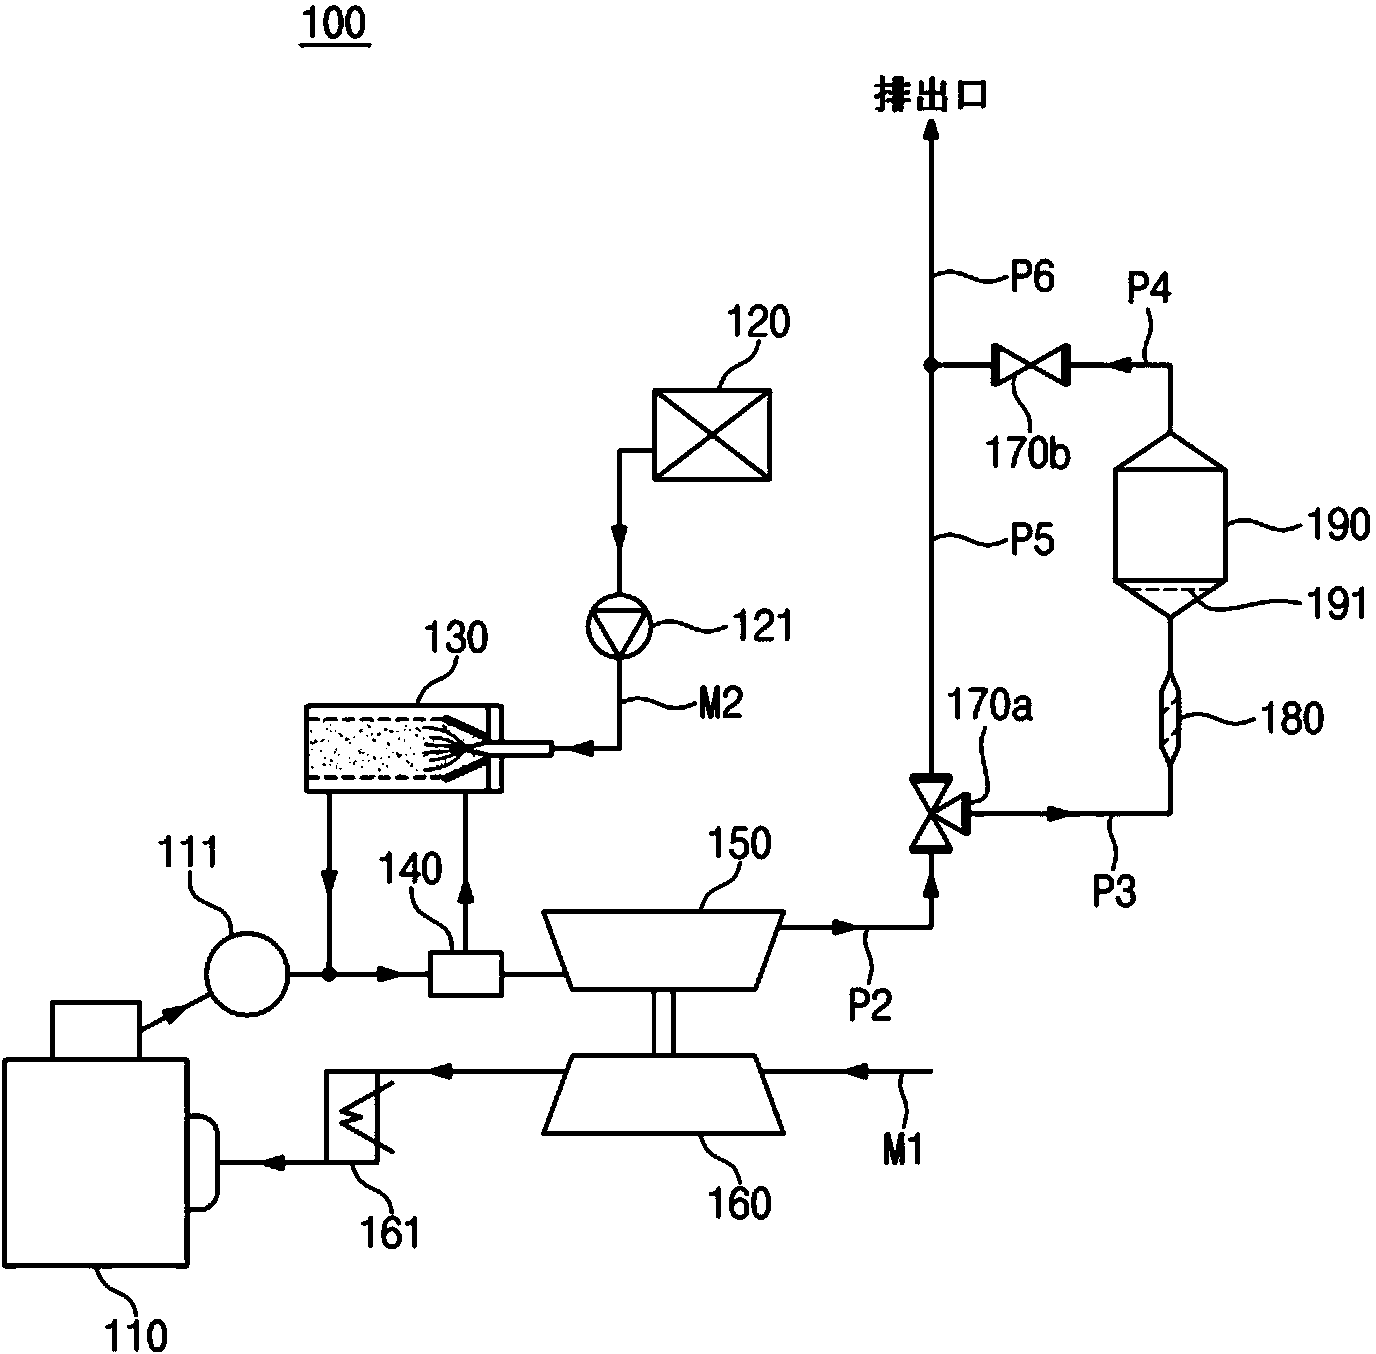 Apparatus for removing nitrogen oxides